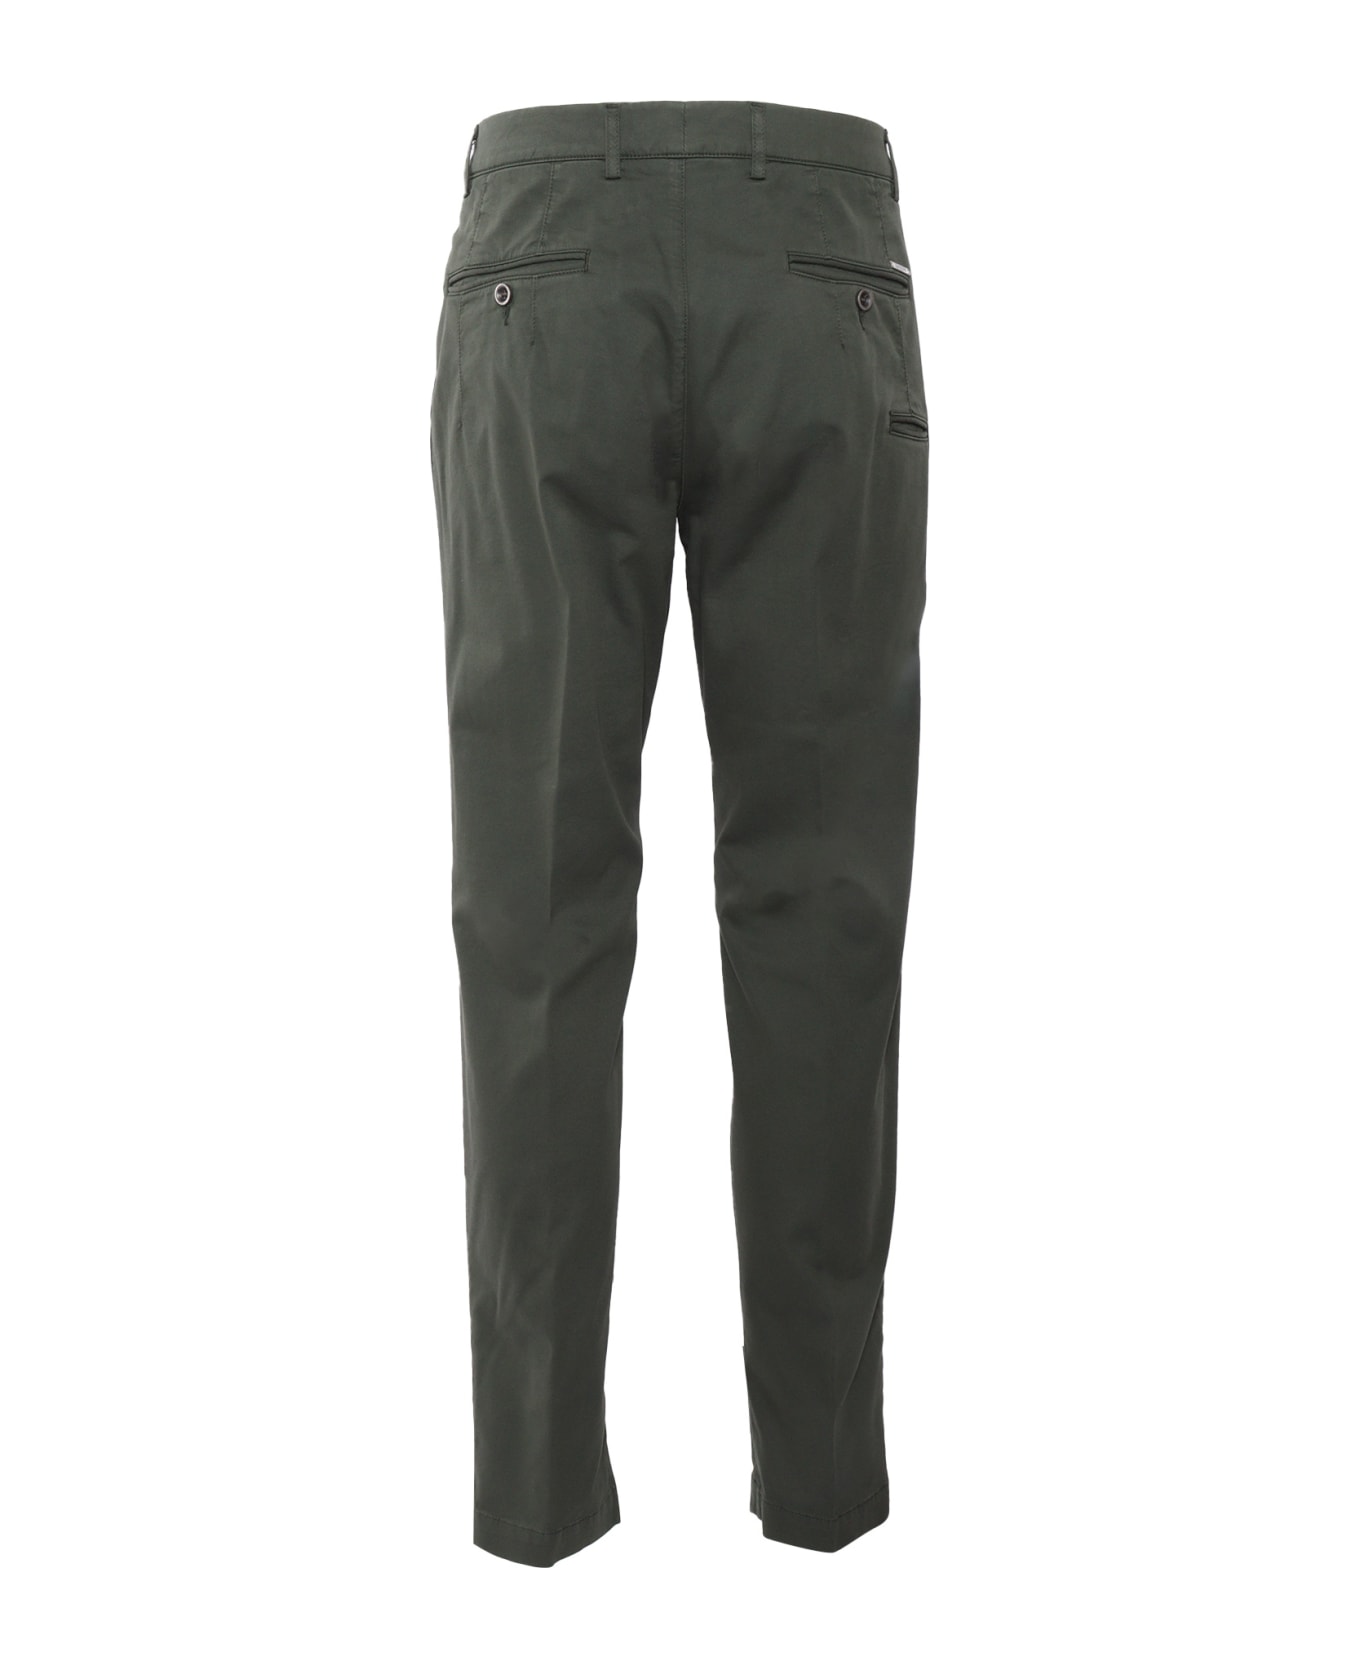 Peserico Olive Green Trousers - GREEN ボトムス